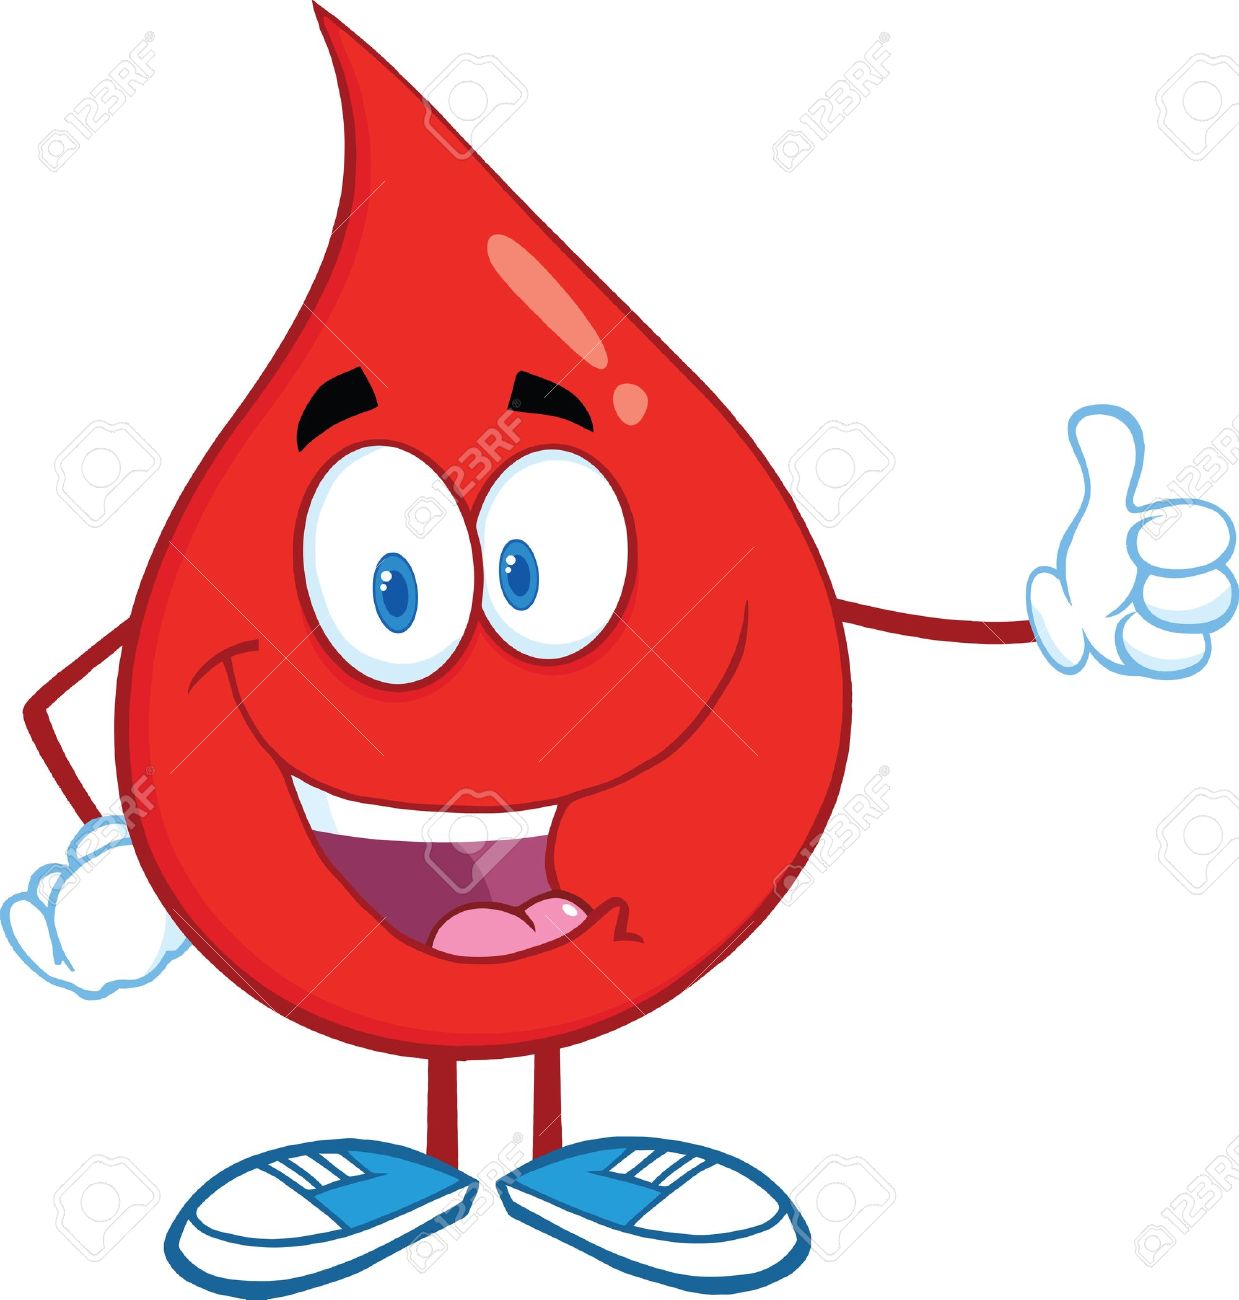 free blood clipart images - photo #26